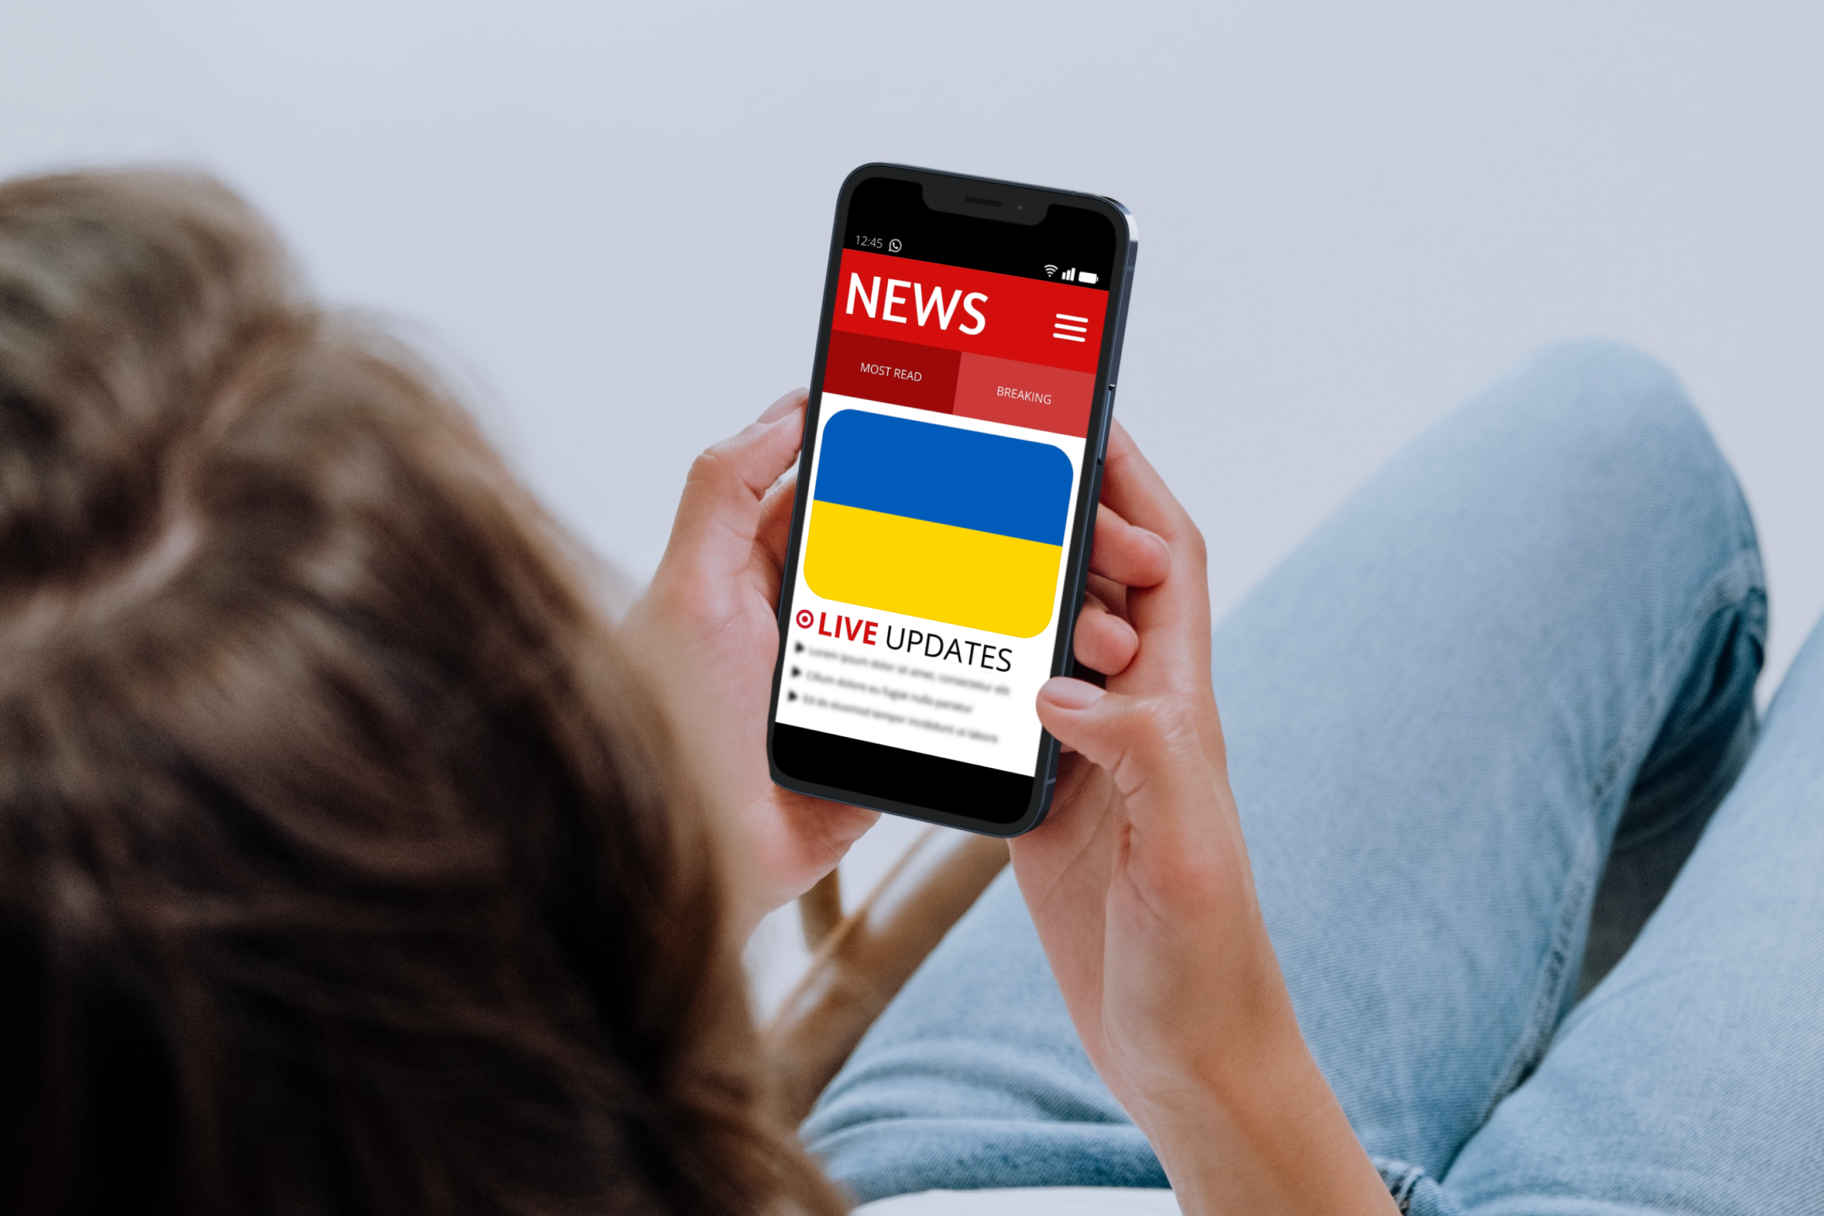 Image shows a young woman (18-30) holding a mobile phone. On the phone screen is a news app - showing live updates of the Russian Invasion of Ukraine. Overconsumption of news during crises can be negative to our wellbeing.